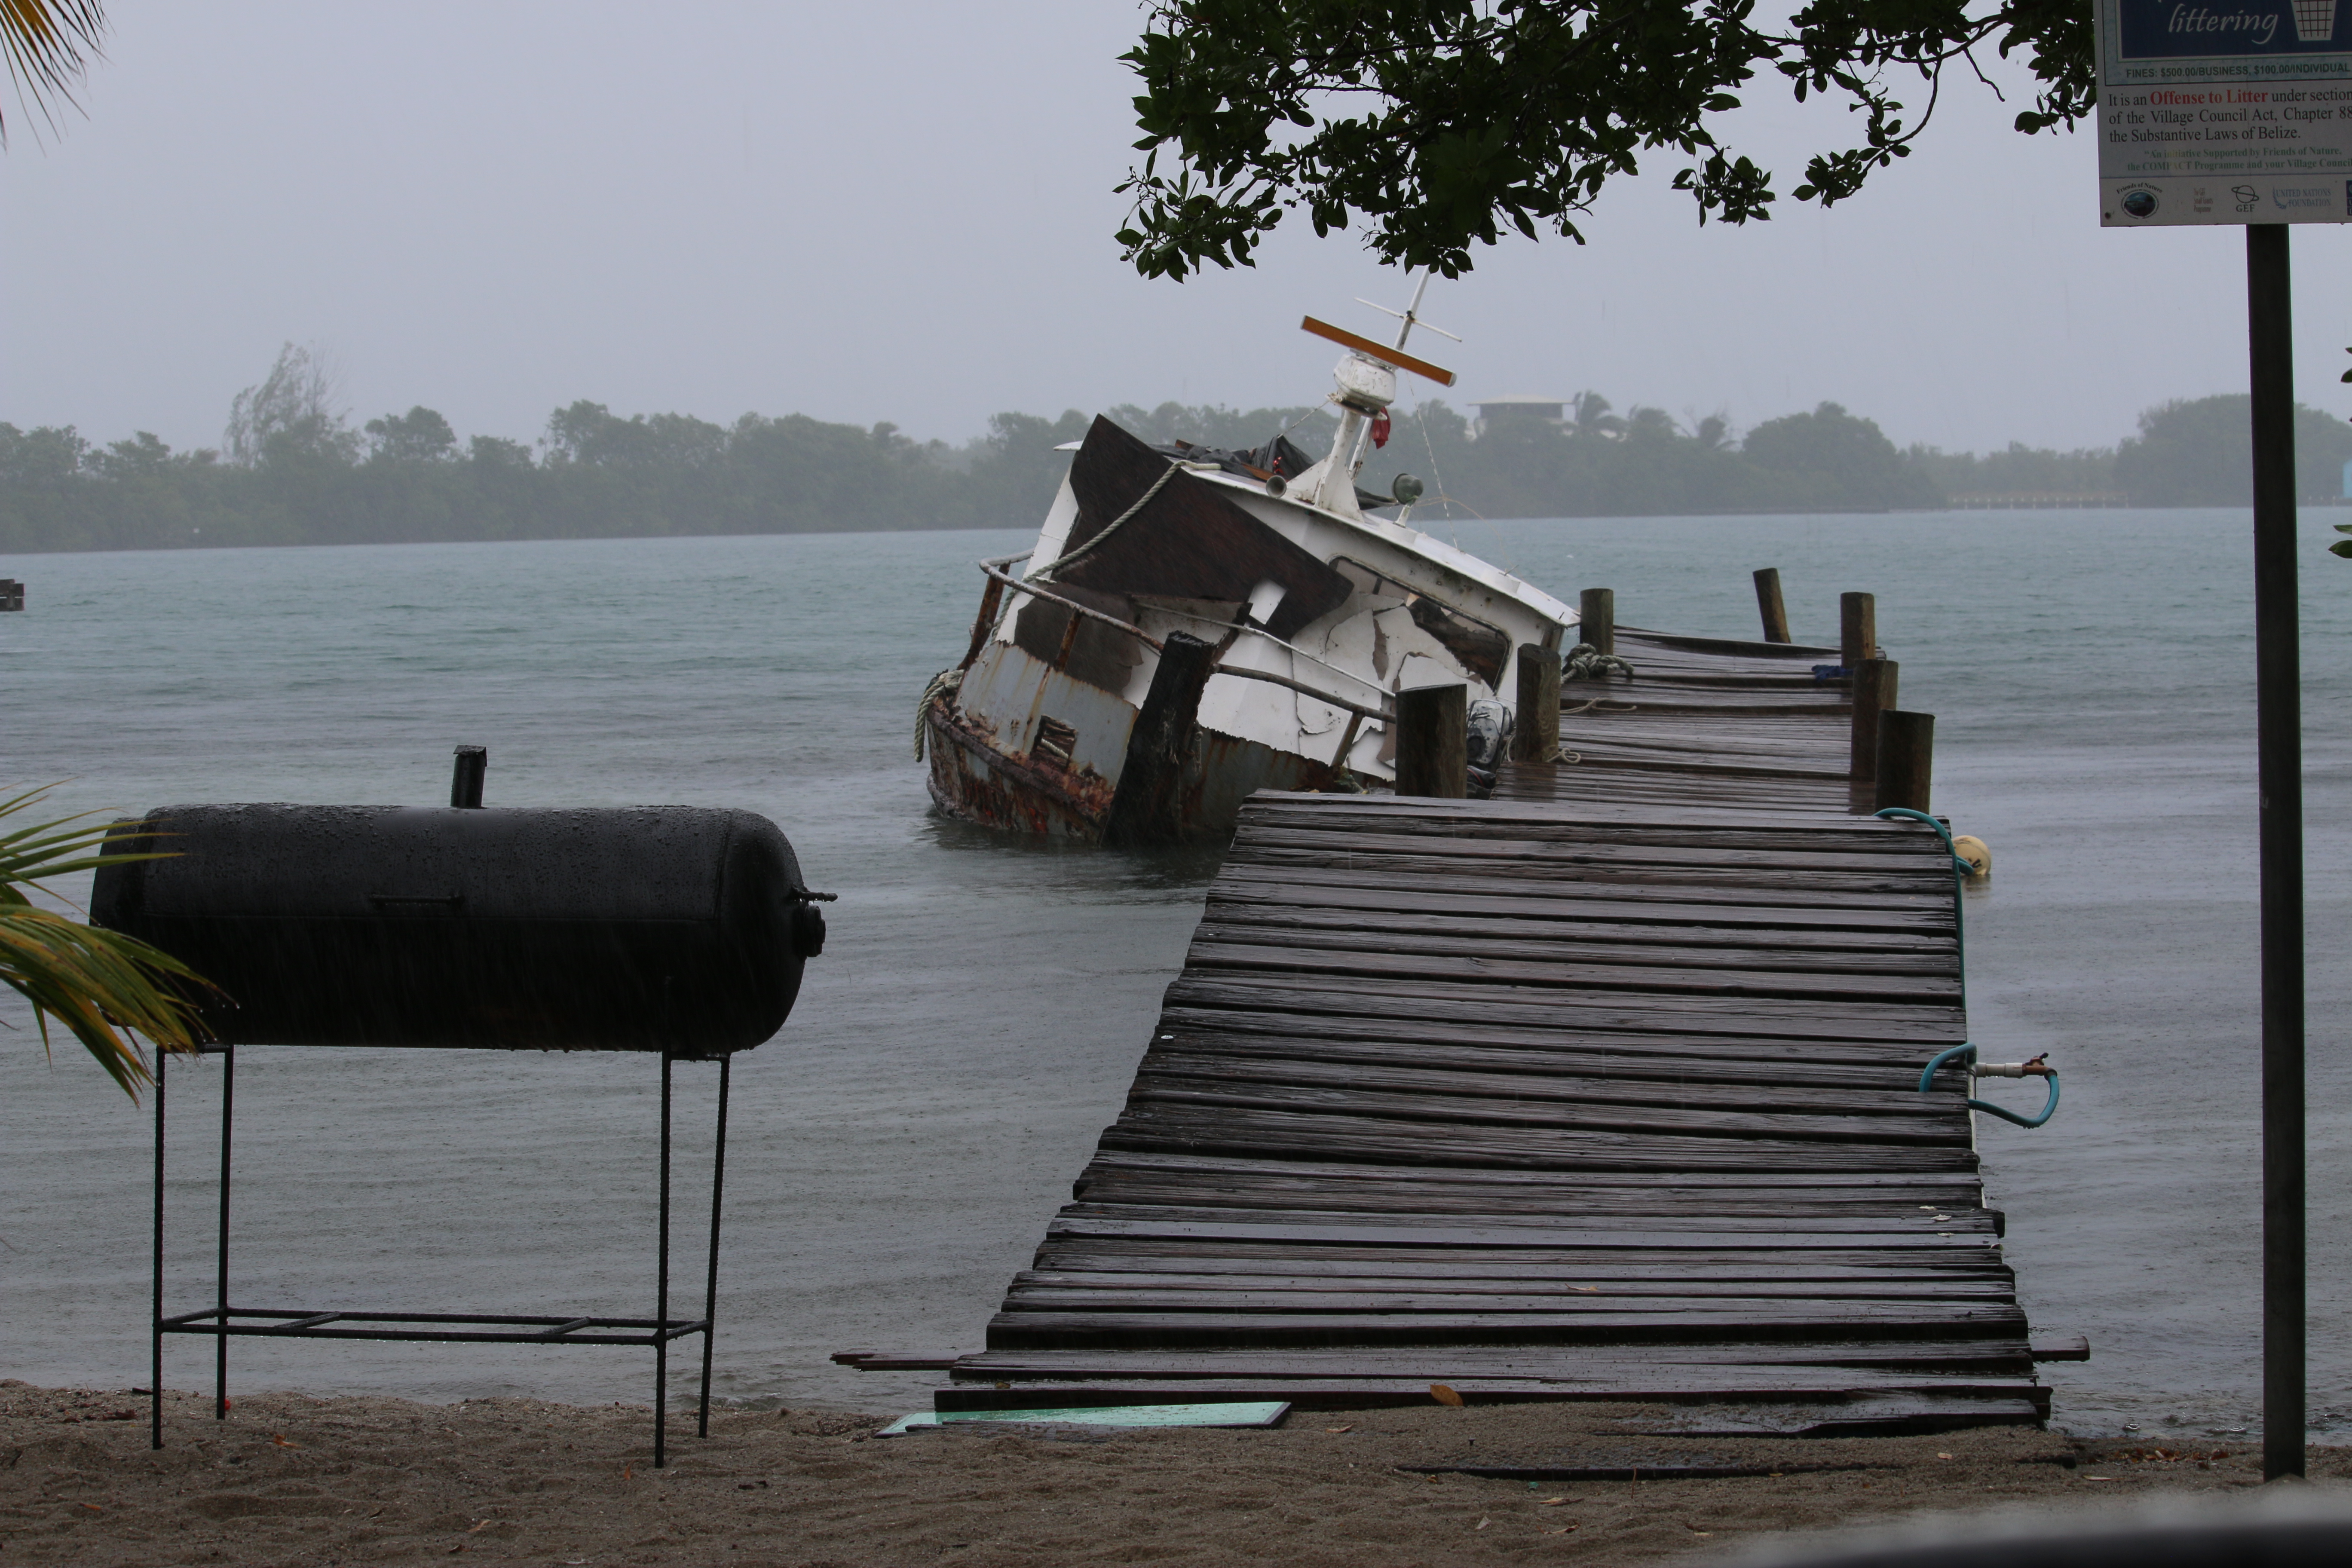 This dead boat was tied to a dock in Placencia, the same town where we would later in the trip book a water tour. This proves we are a) dumber than stumps, b) crazy, c) adventurous, d) all of the above! 